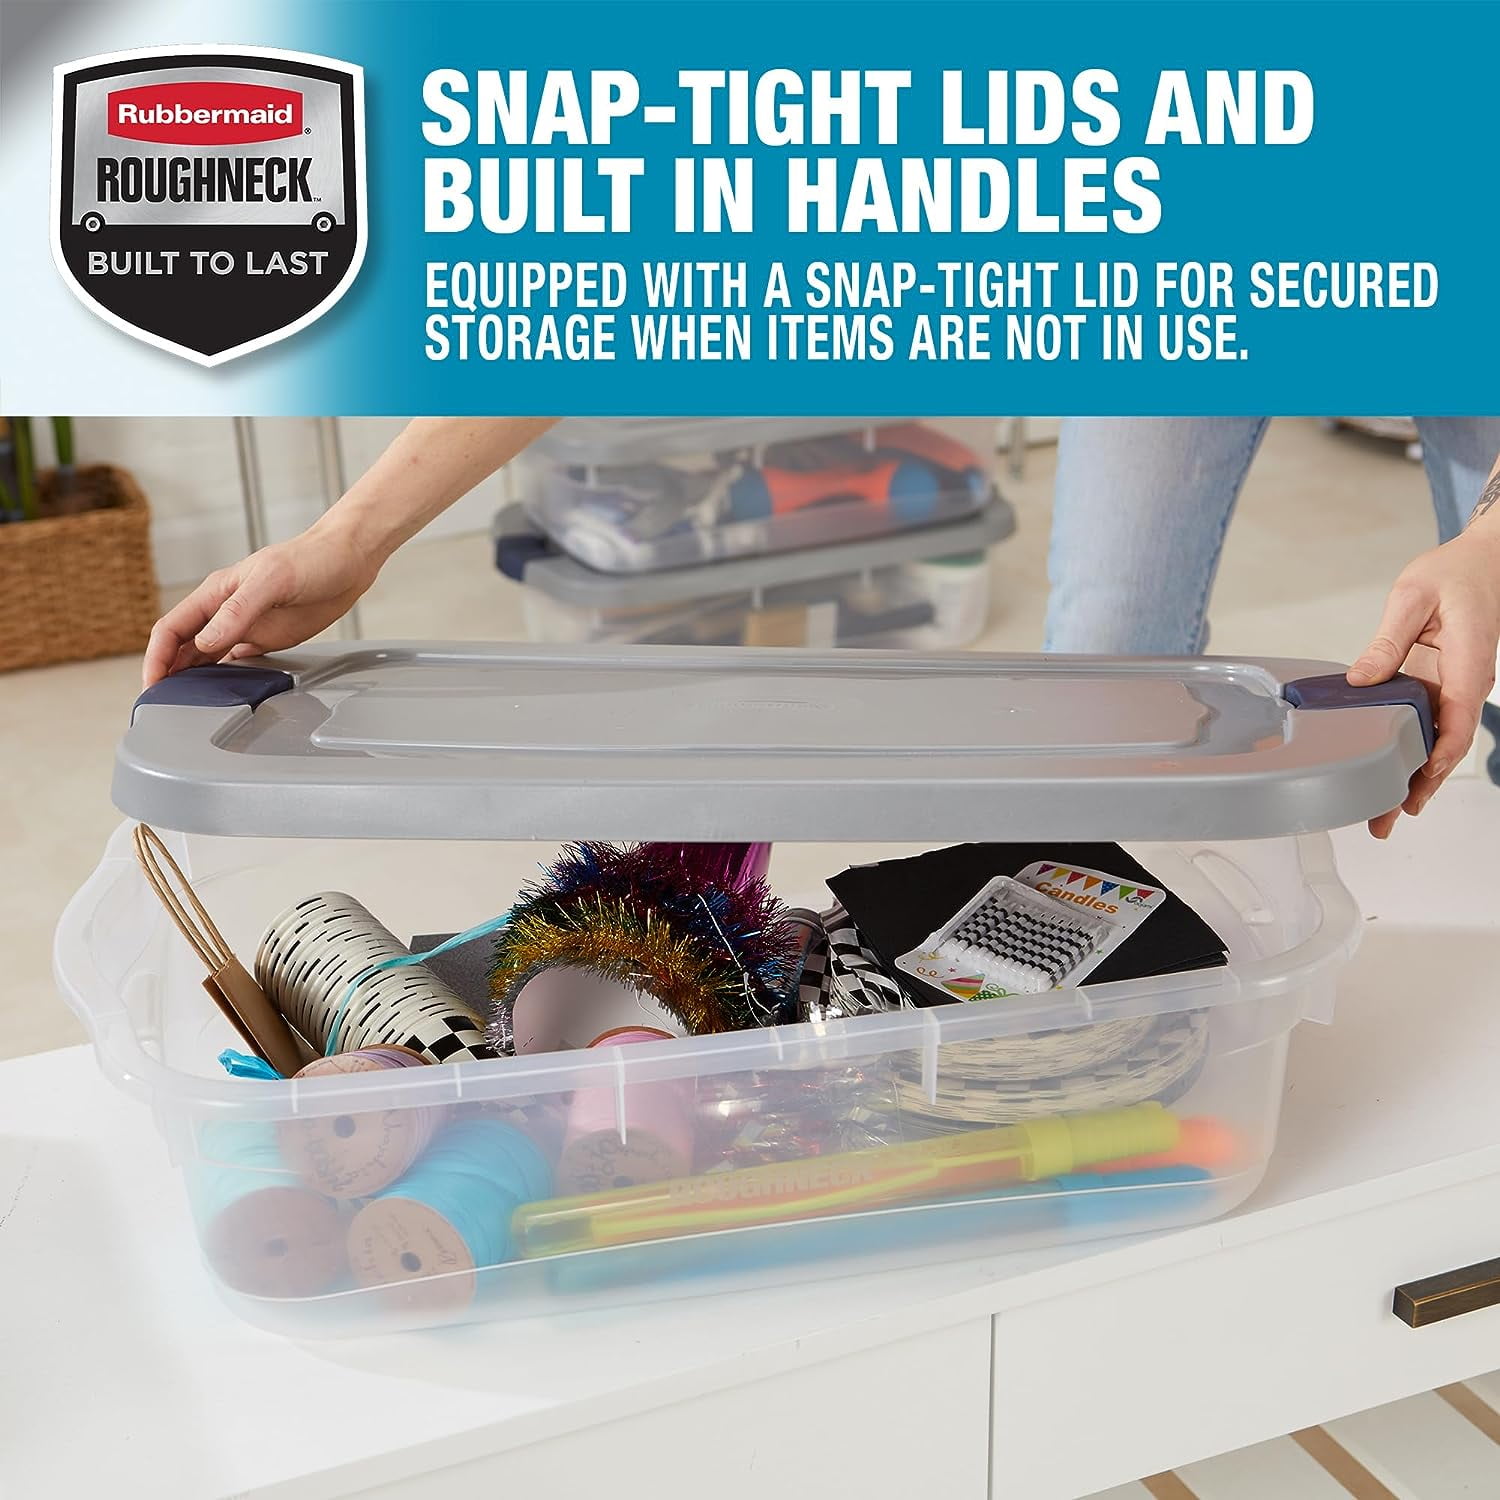 Rubbermaid Roughneck Clear Storage Container 5-Pack $34.95 from $62